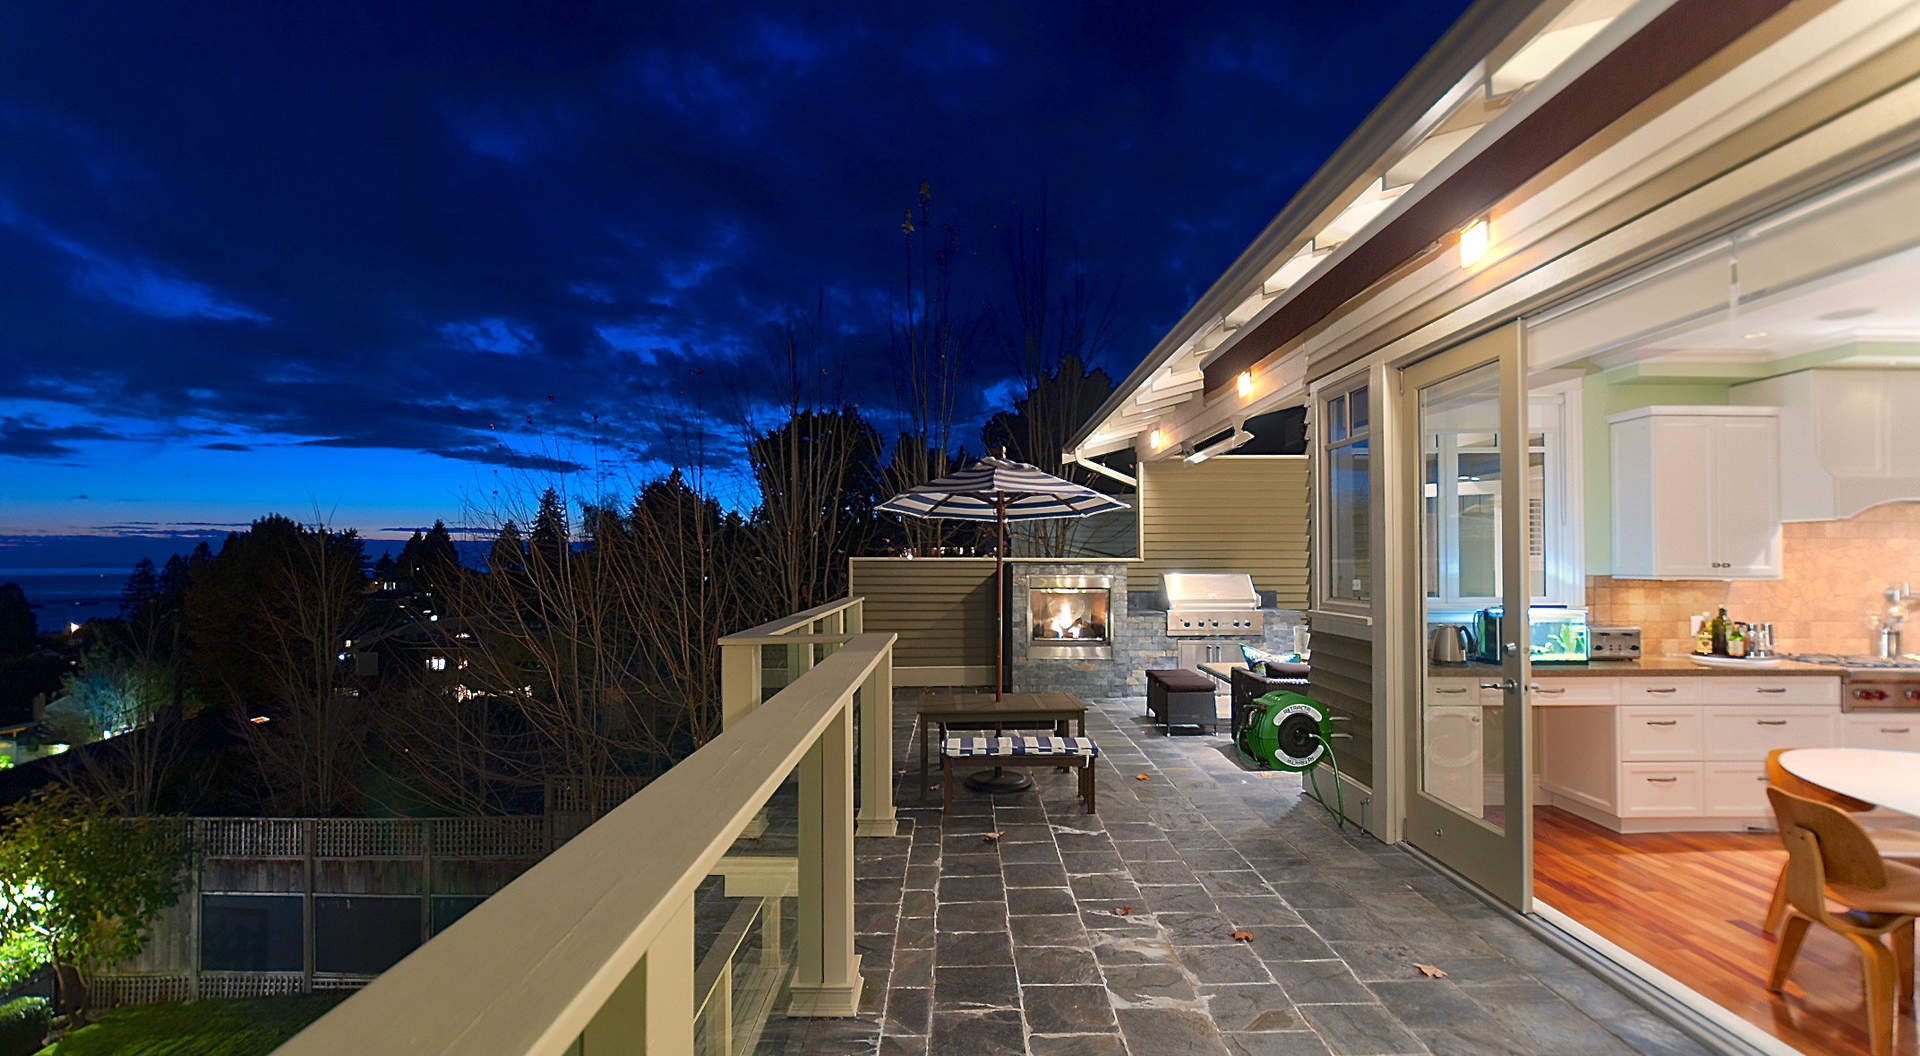 Large Sundeck Overlooking the South Facing Backyard